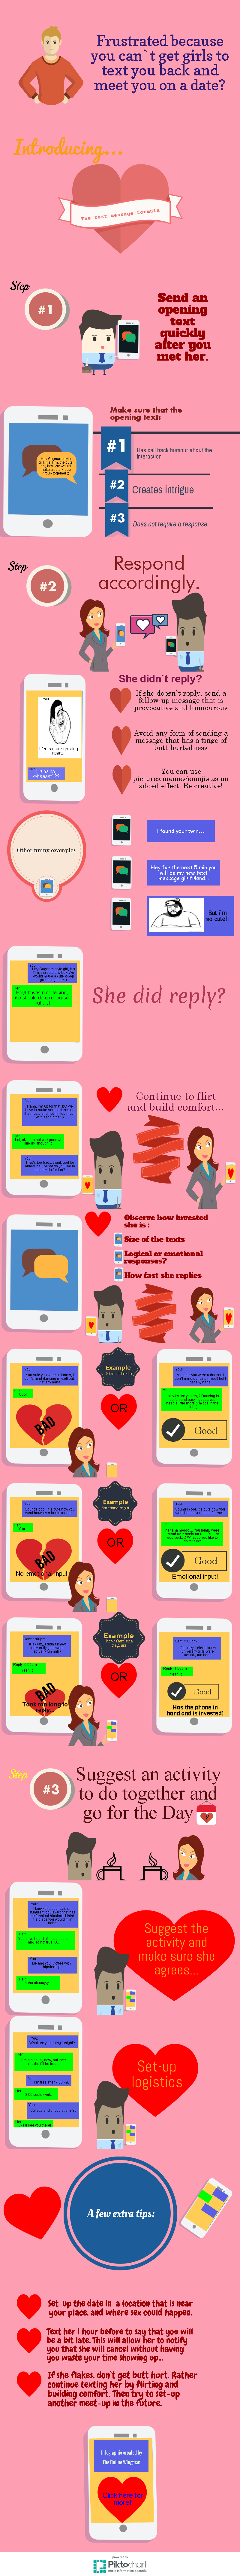 texting-infographic